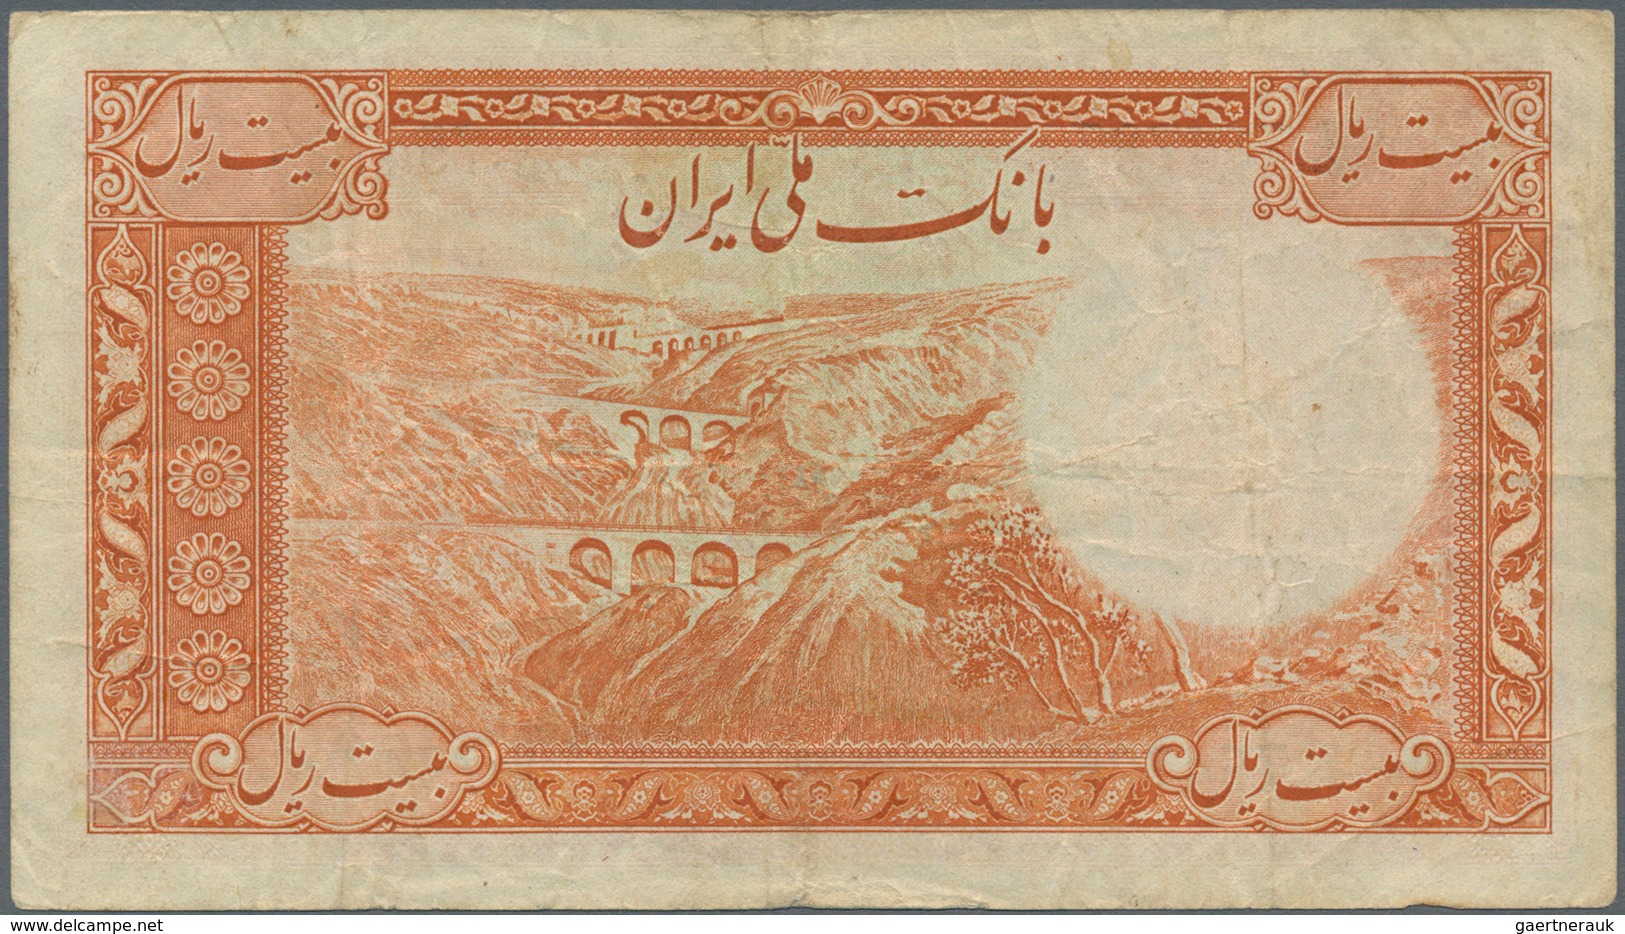 Iran: 20 Rials ND P. 34 In Used Condition With Several Folds And Creases, Black Stamp On Back, Condi - Iran